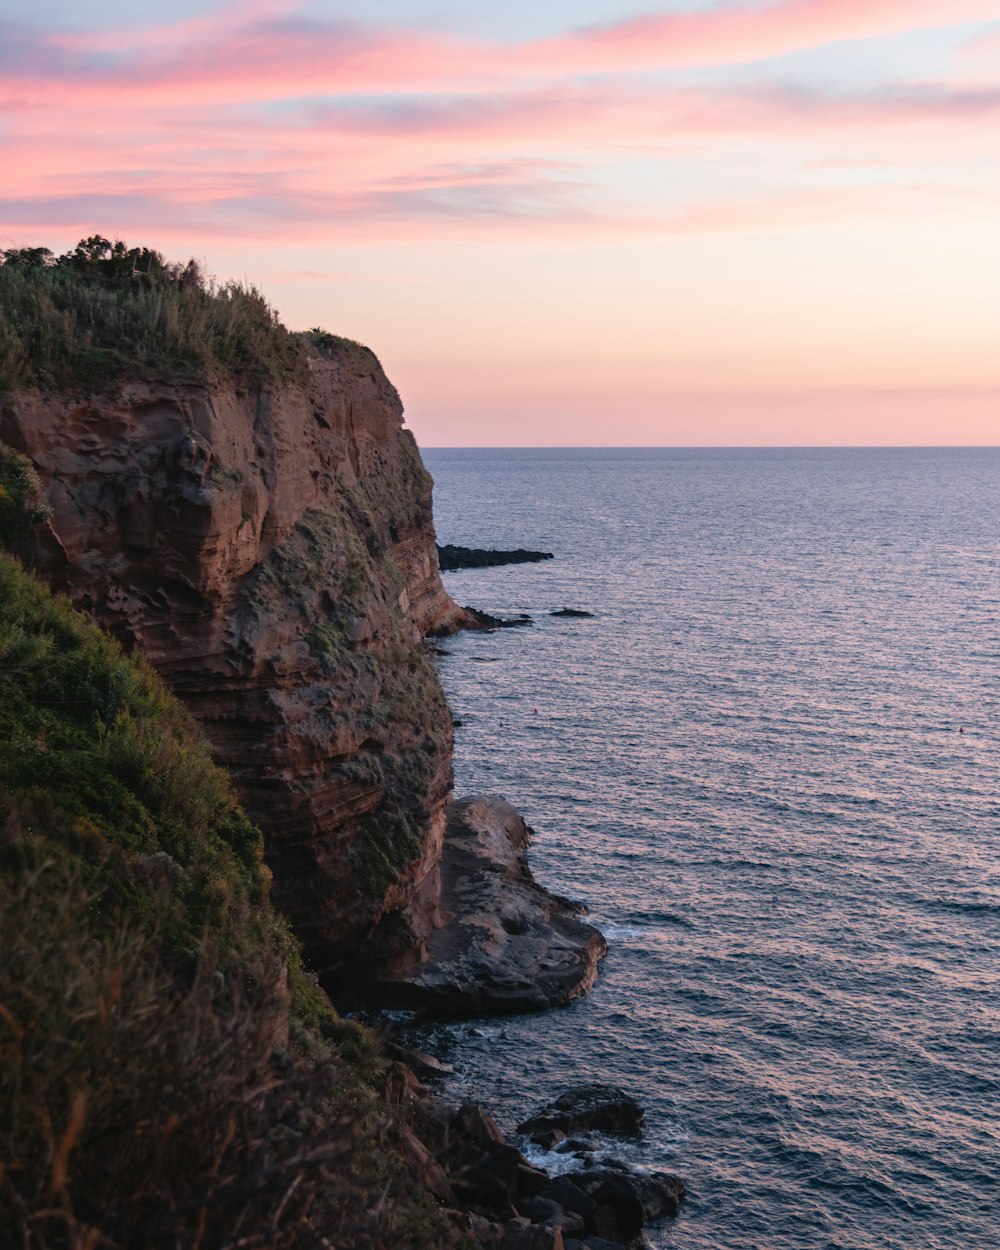 brown rocky mountain beside sea during sunset